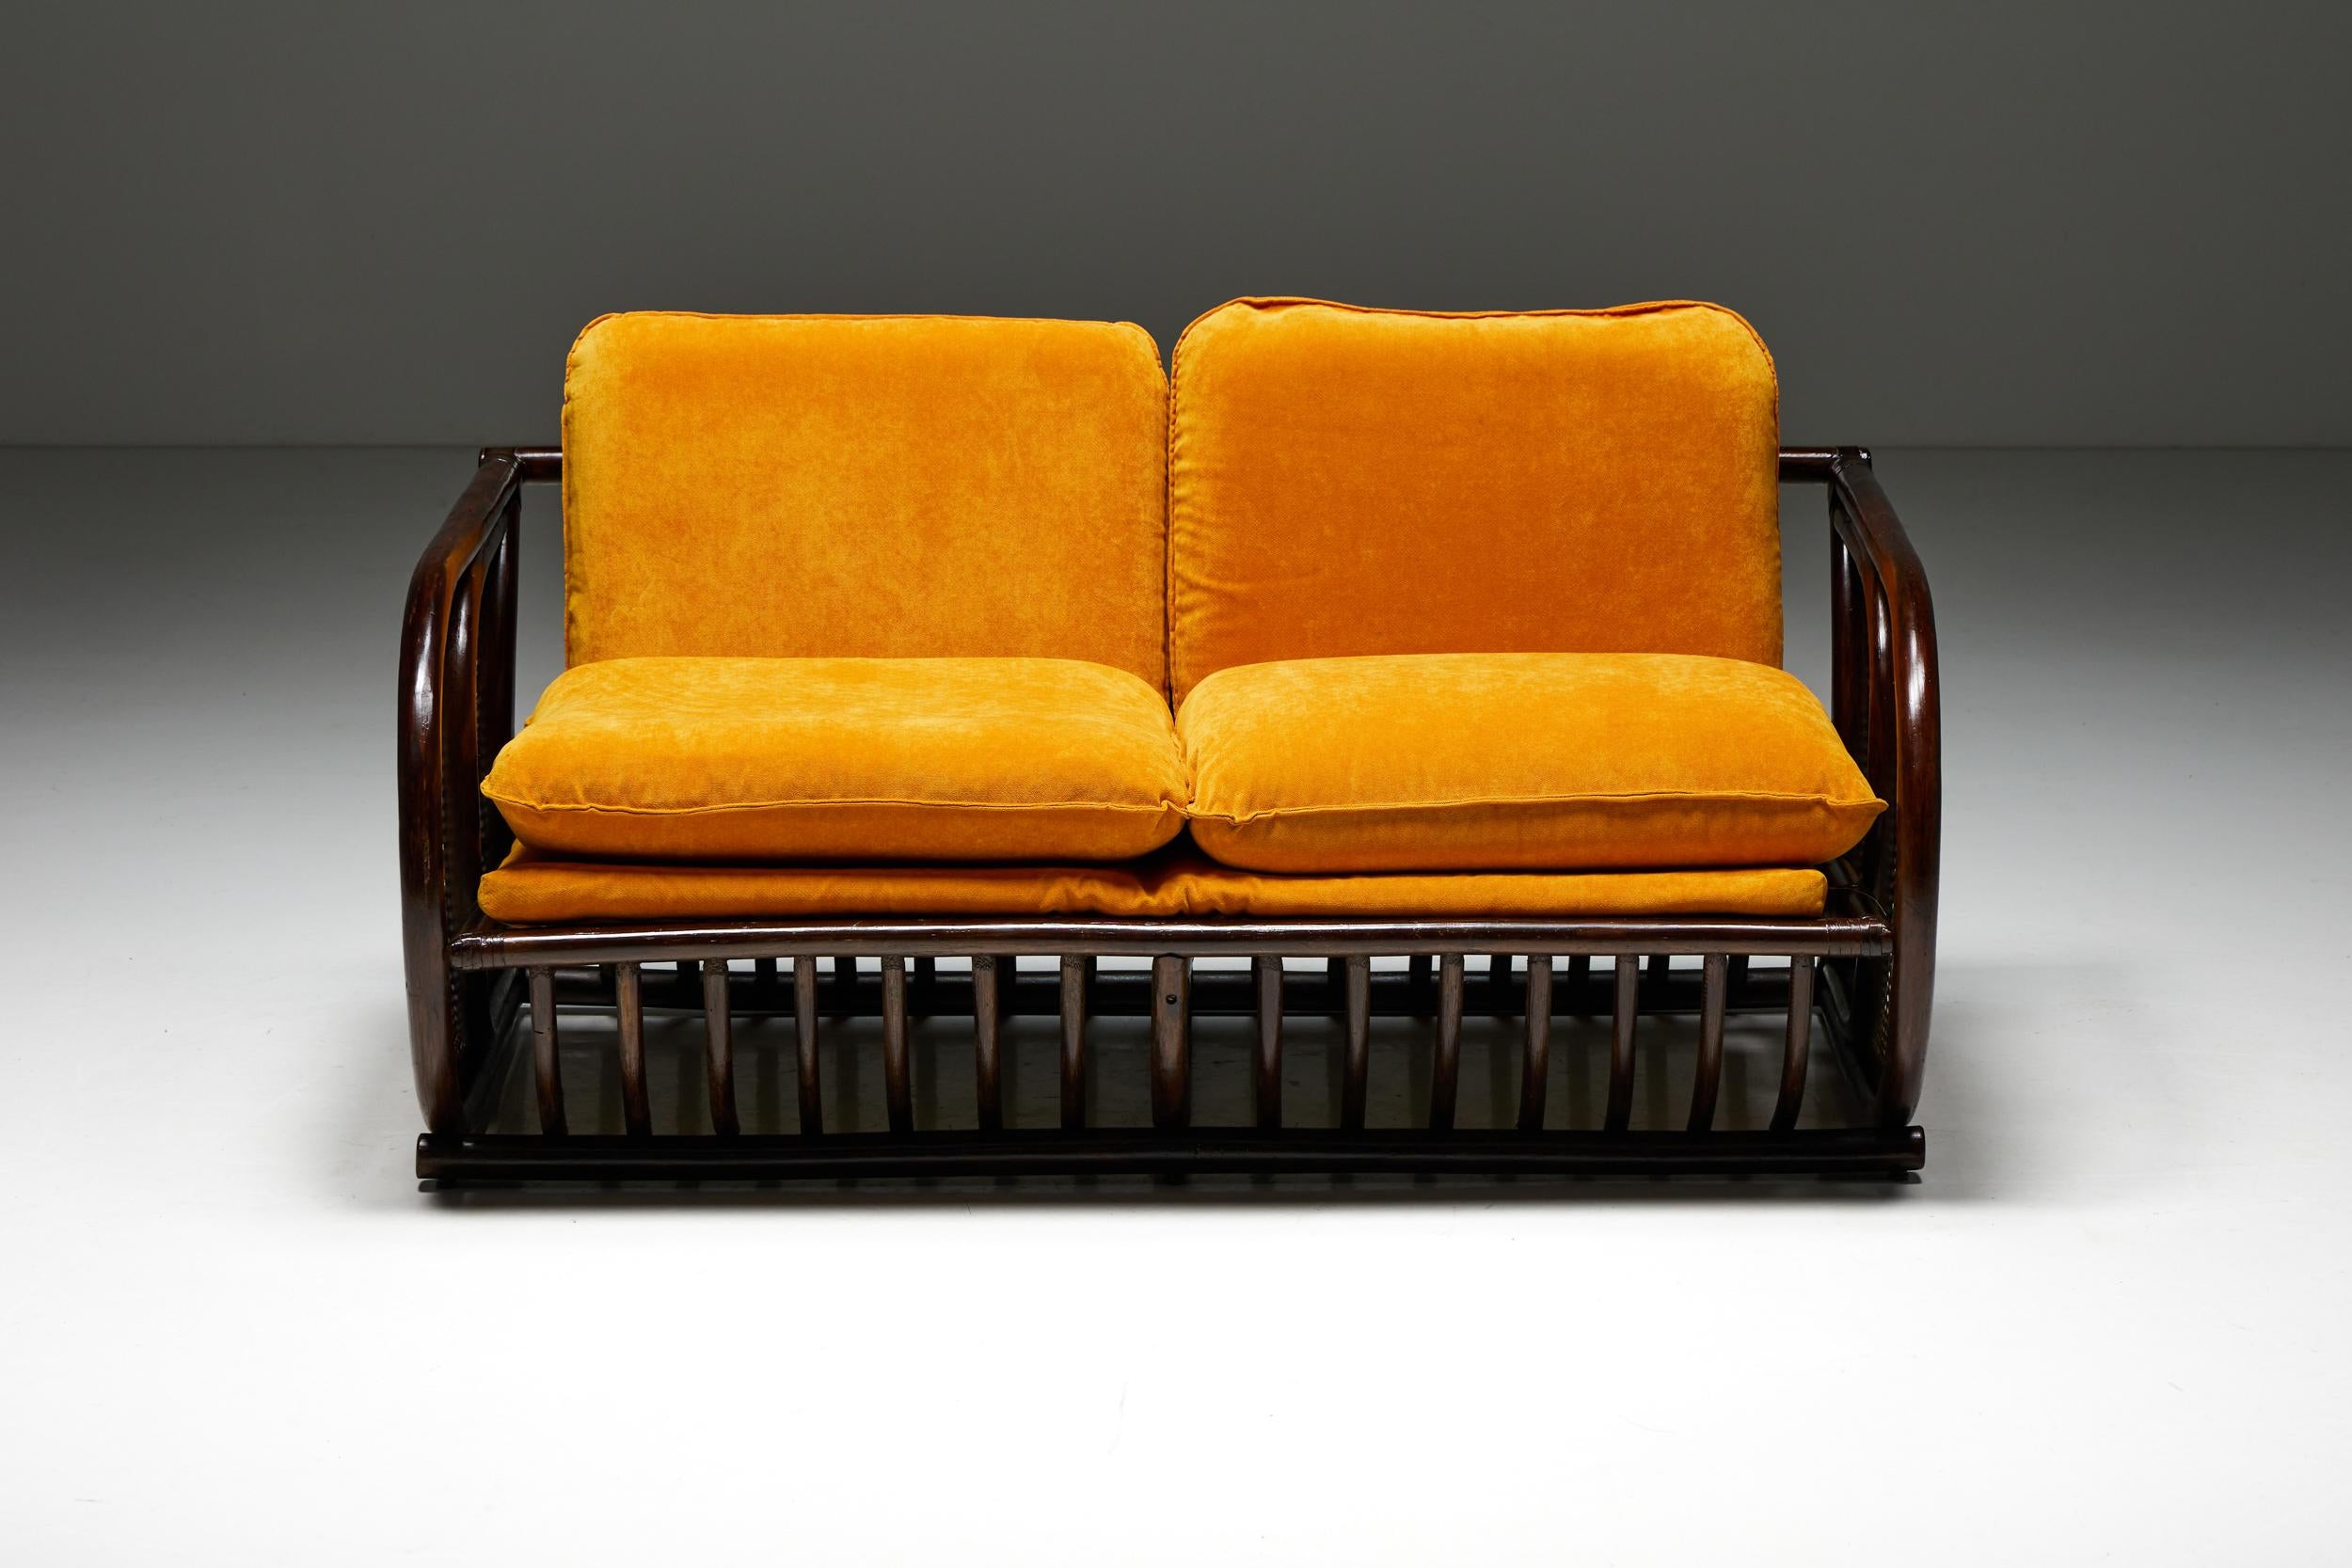 Italian Design; Art Deco; Vienna Straw; Bamboo; Outdoor; Indoor; Two Seater; Bench; 1970s; Mid-Century Modern; Italy;

Two-seater bench in art deco style, featuring gracefully rounded sides adorned with Vienna straw. Inspired by the renowned